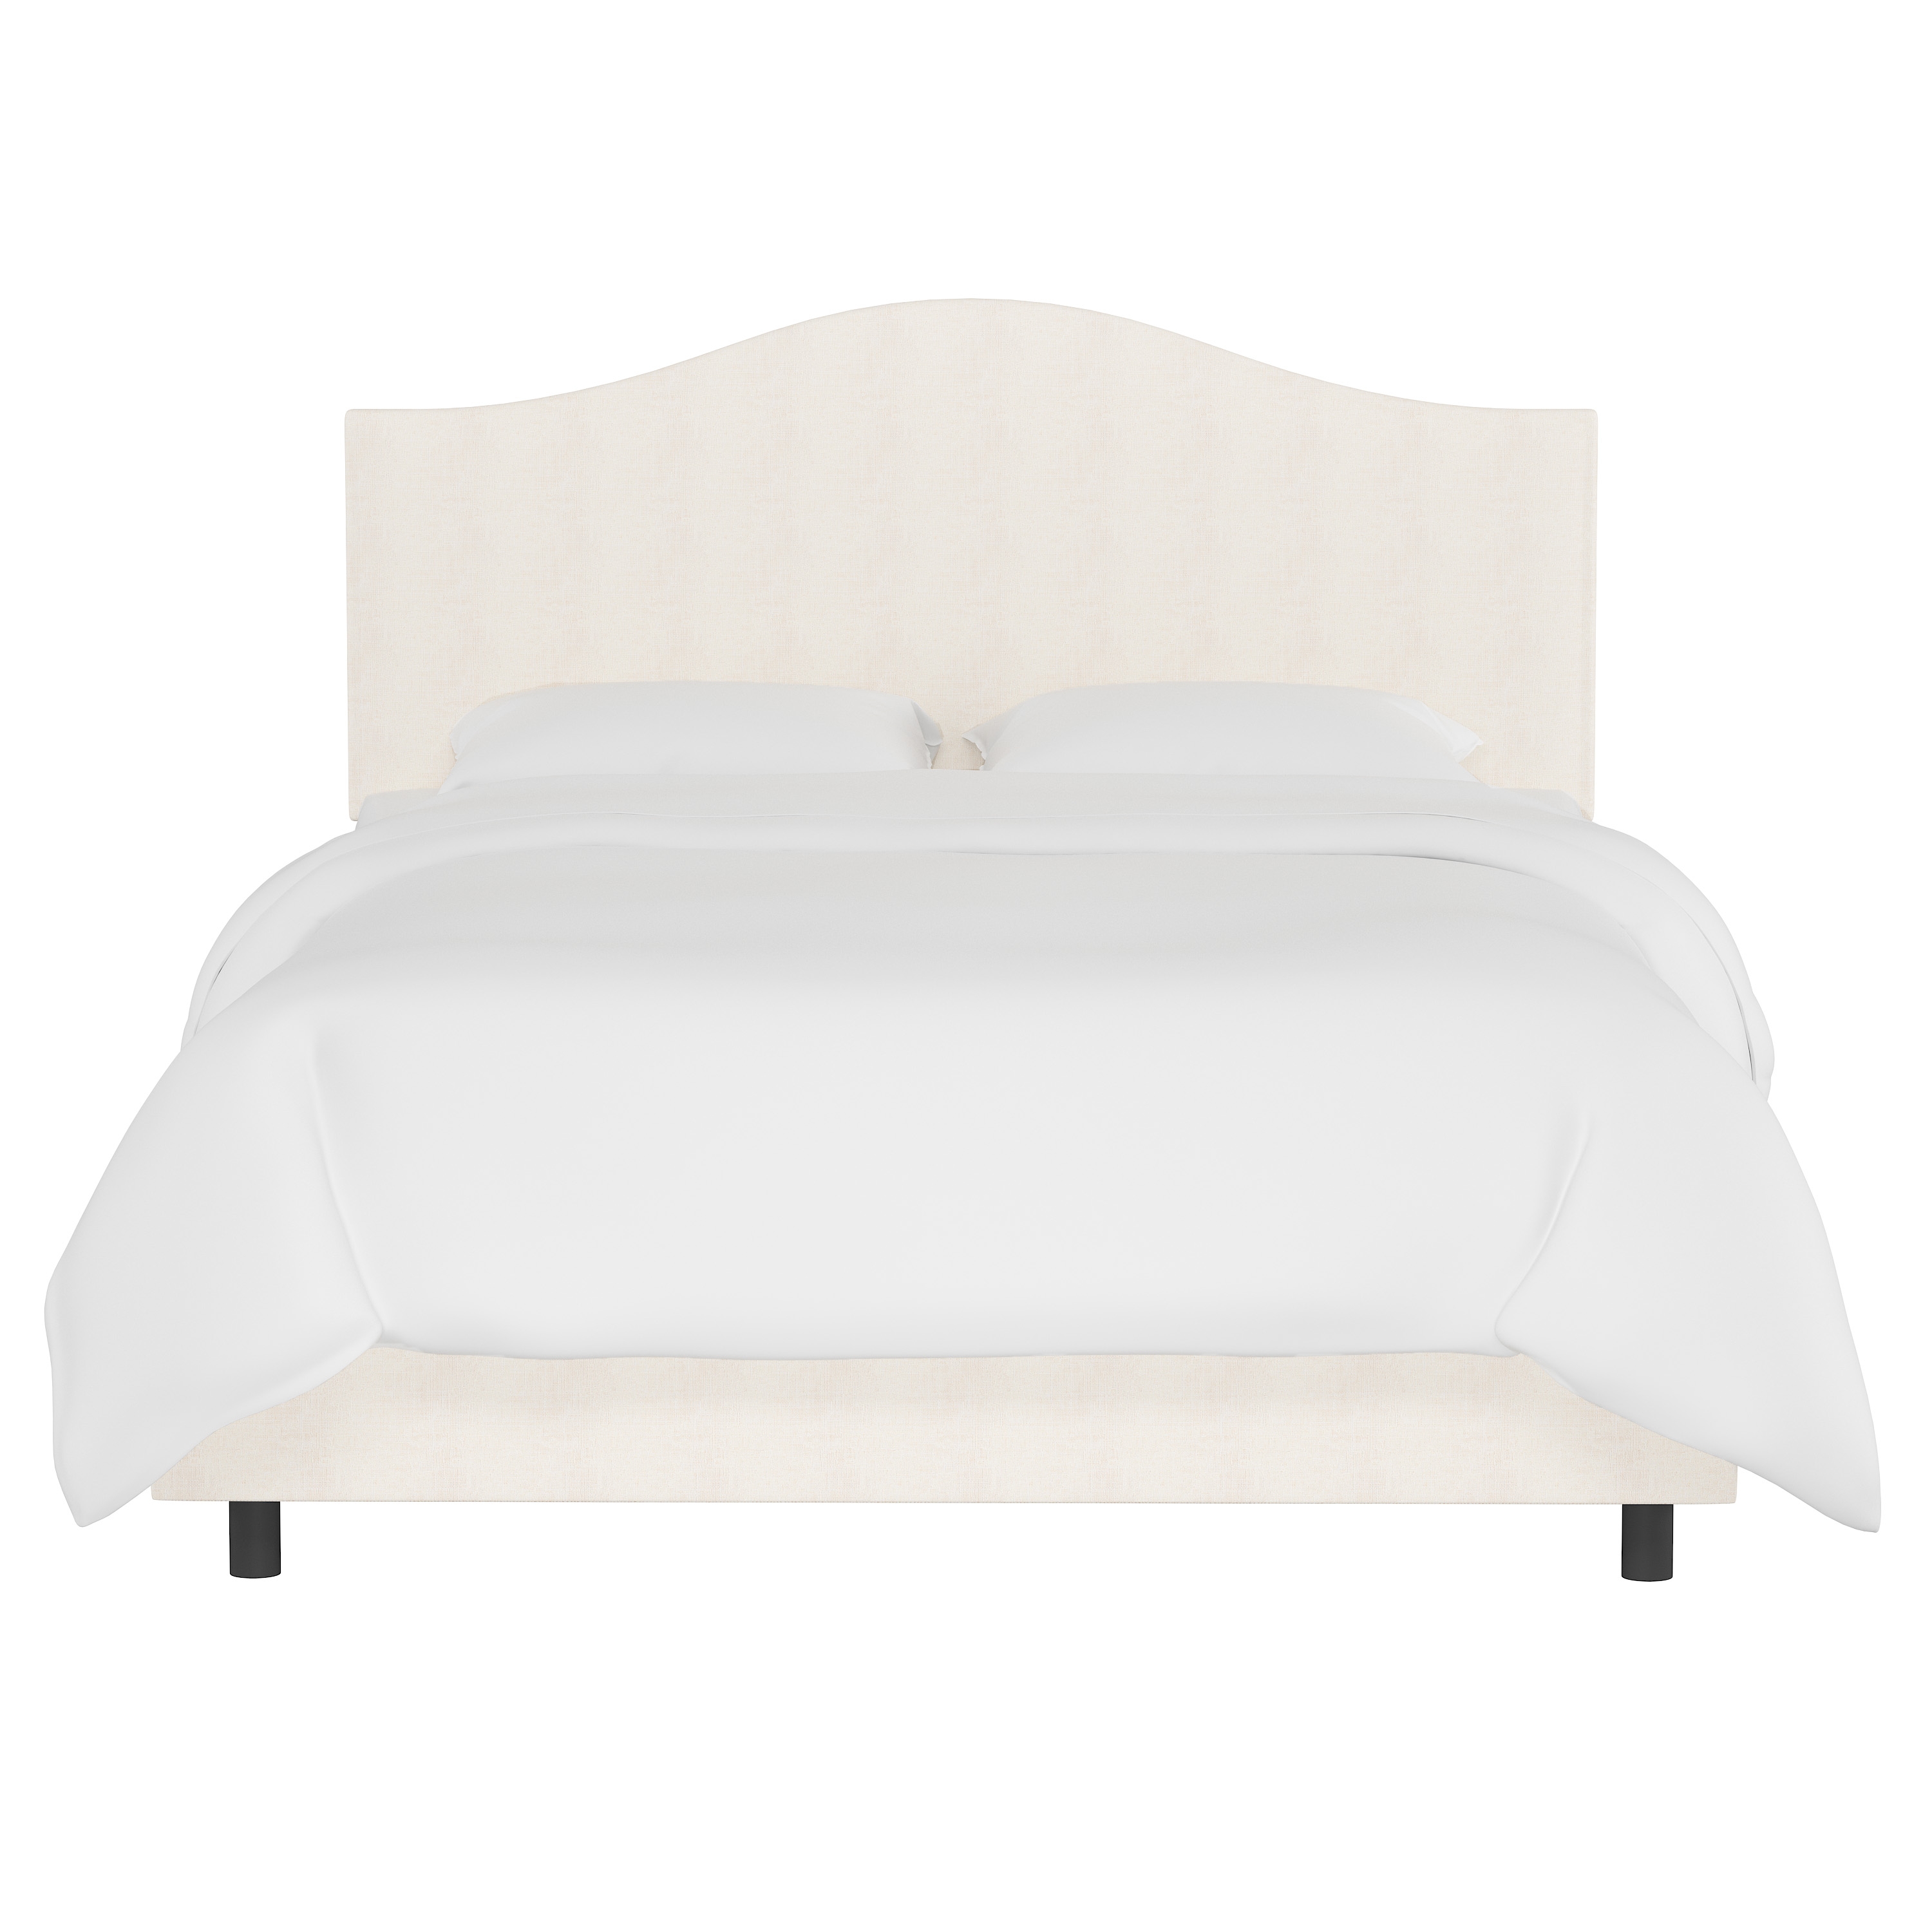 California King Kenmore Bed in Zuma White - Image 1